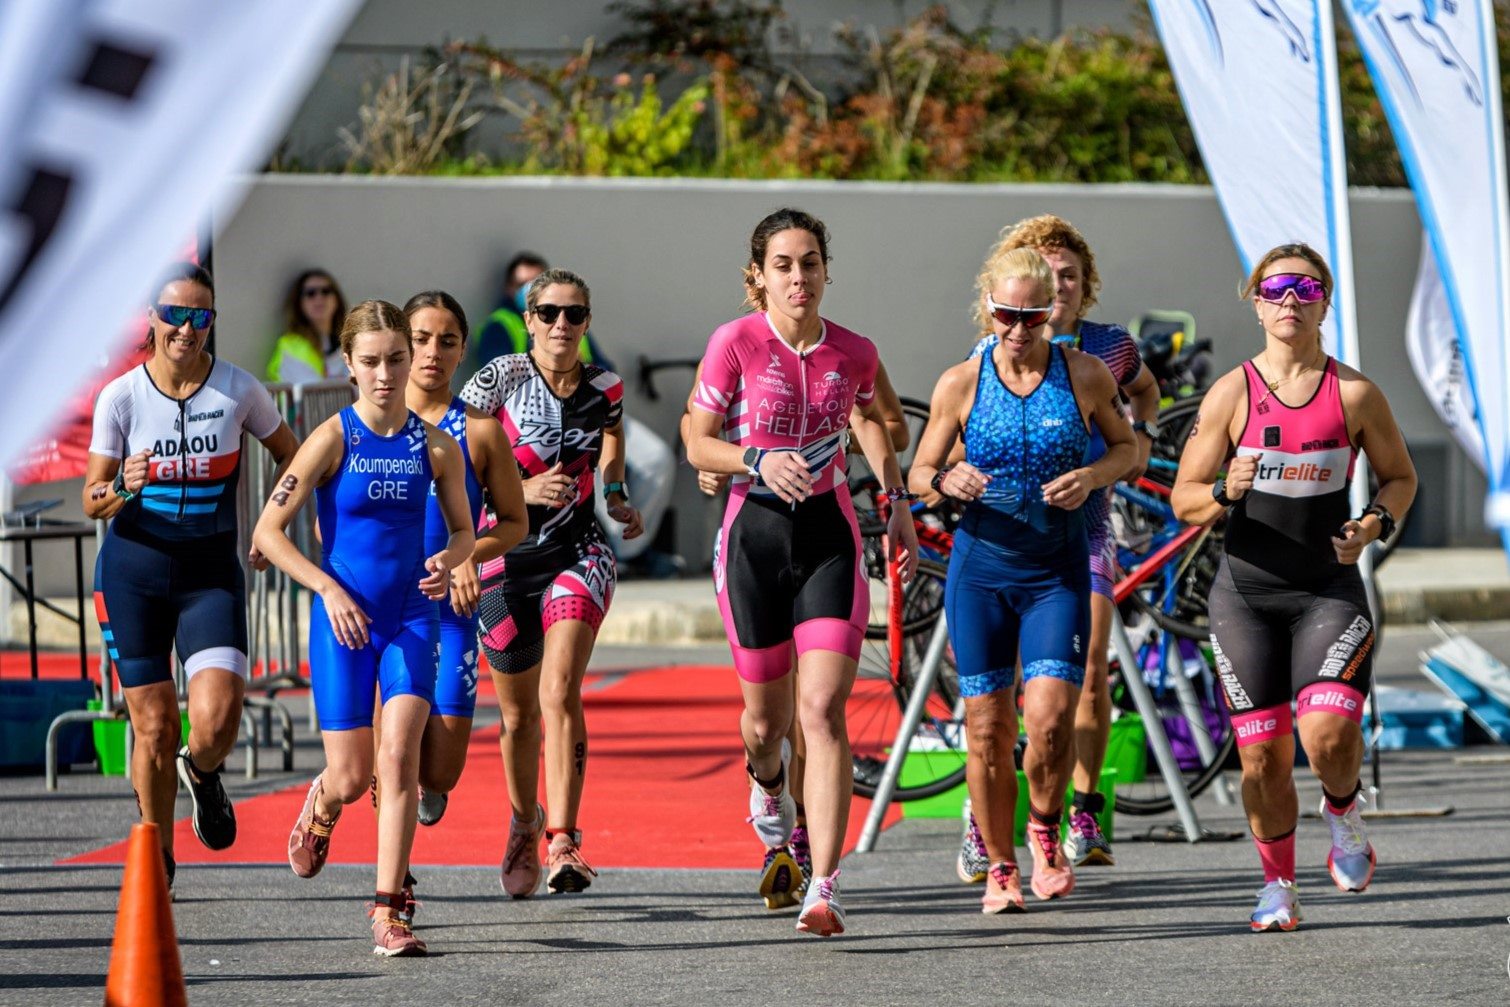 20-surprising-facts-about-triathlon-for-charity